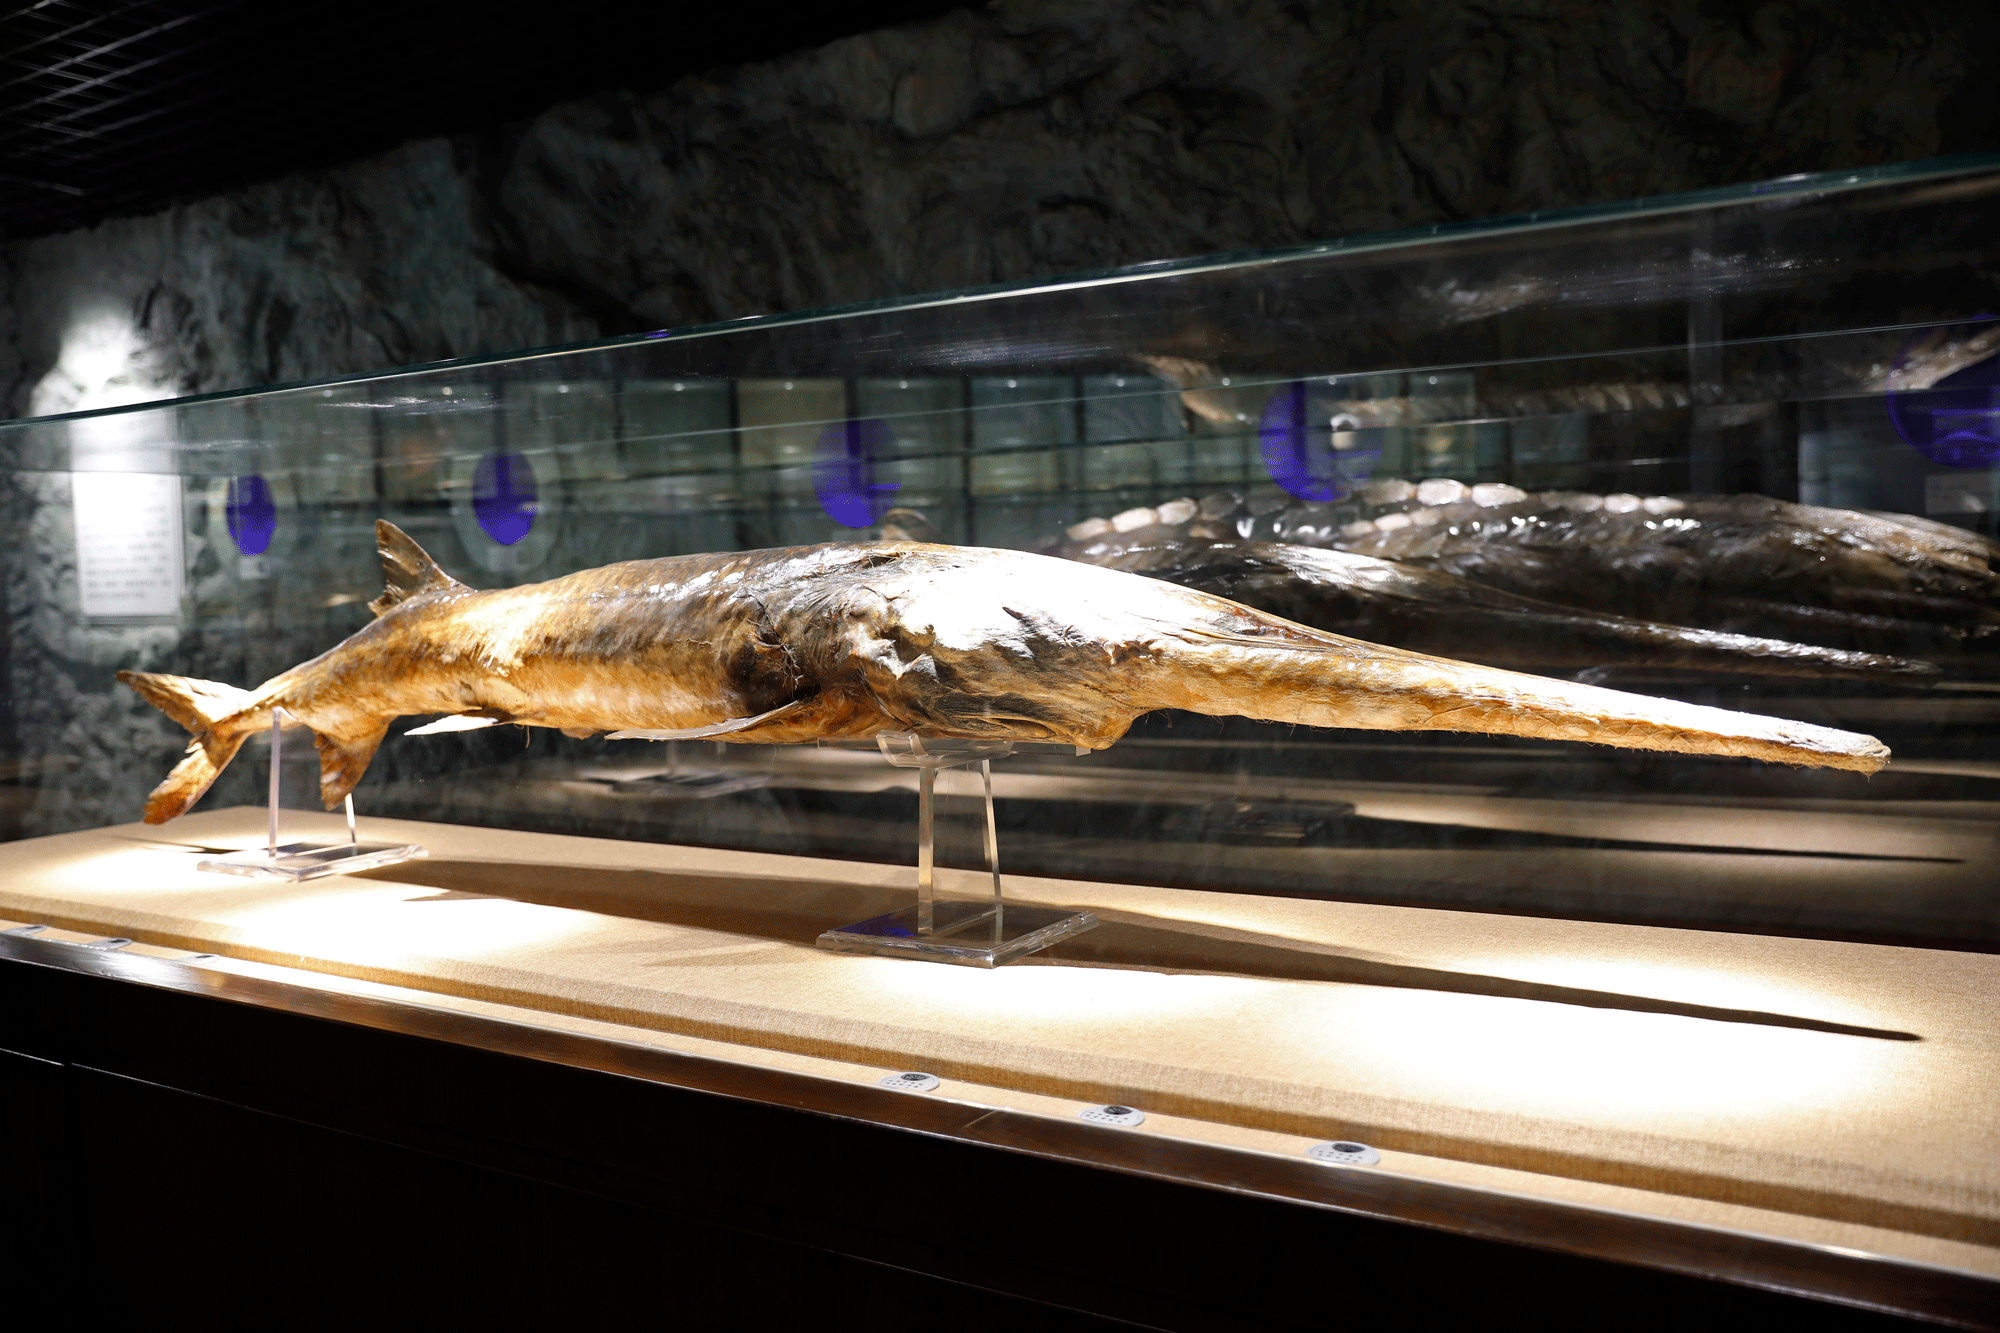 A Chinese paddlefish specimen made in 1990 is seen on display at the Museum of Hydrobiological Science of the Chinese Academy of Sciences in Wuhan, China. The Chinese paddlefish's sharp, protruding snout made it one of the largest freshwater species in the world.